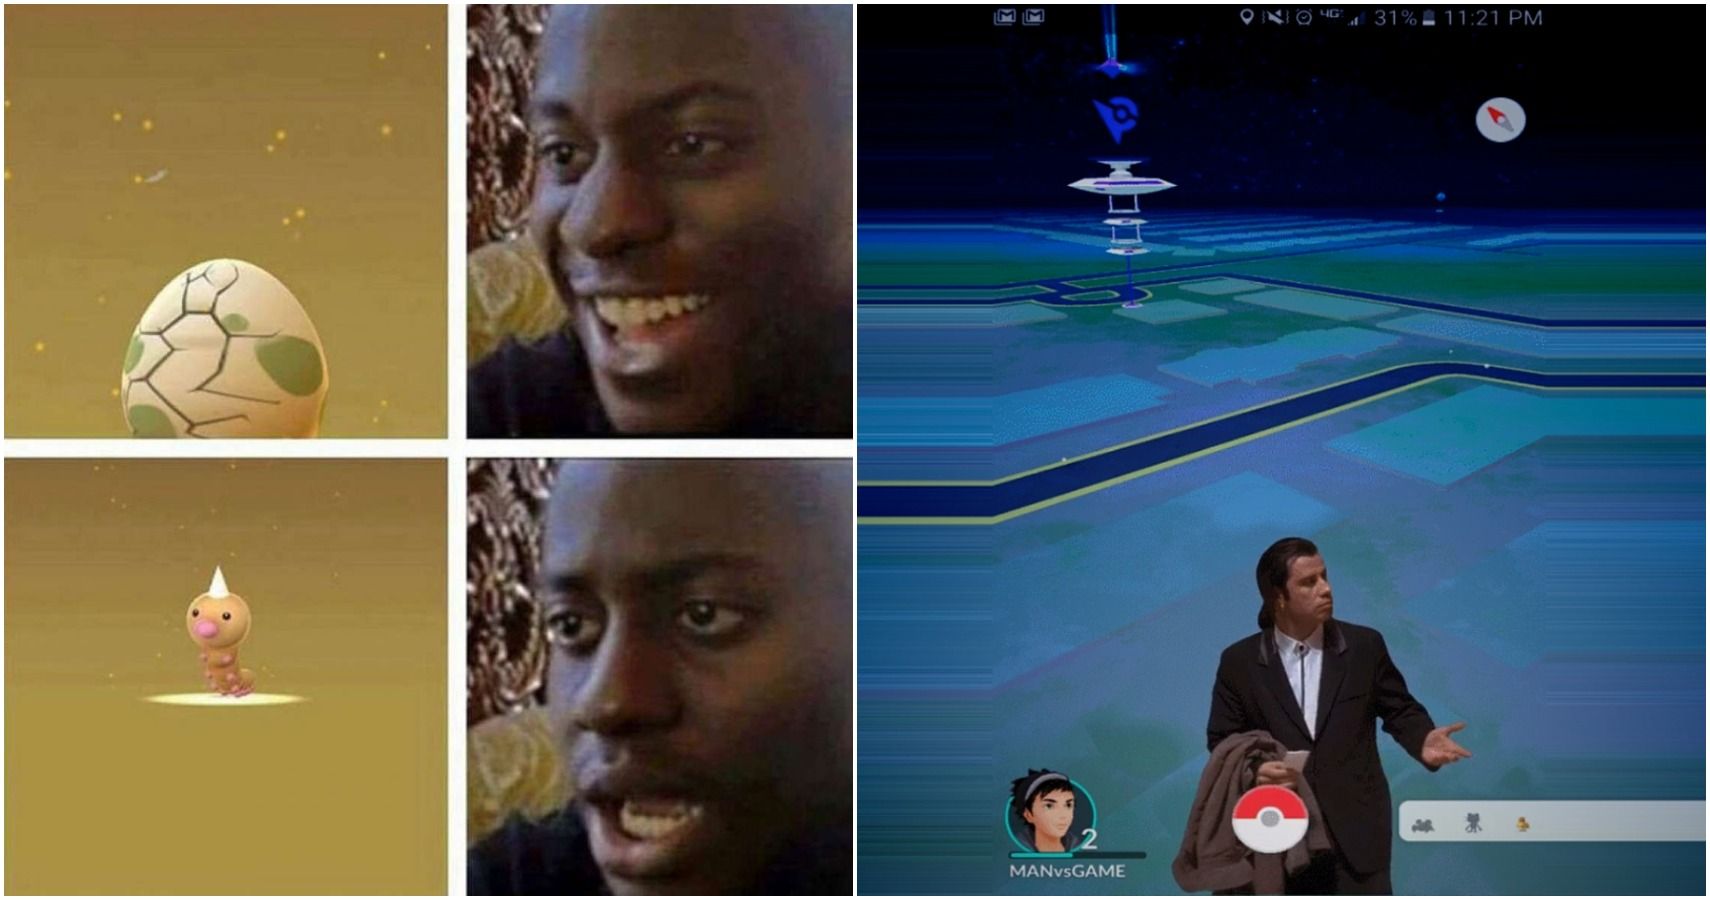 10 Pokémon Go Memes That Perfectly Sum Up The Game